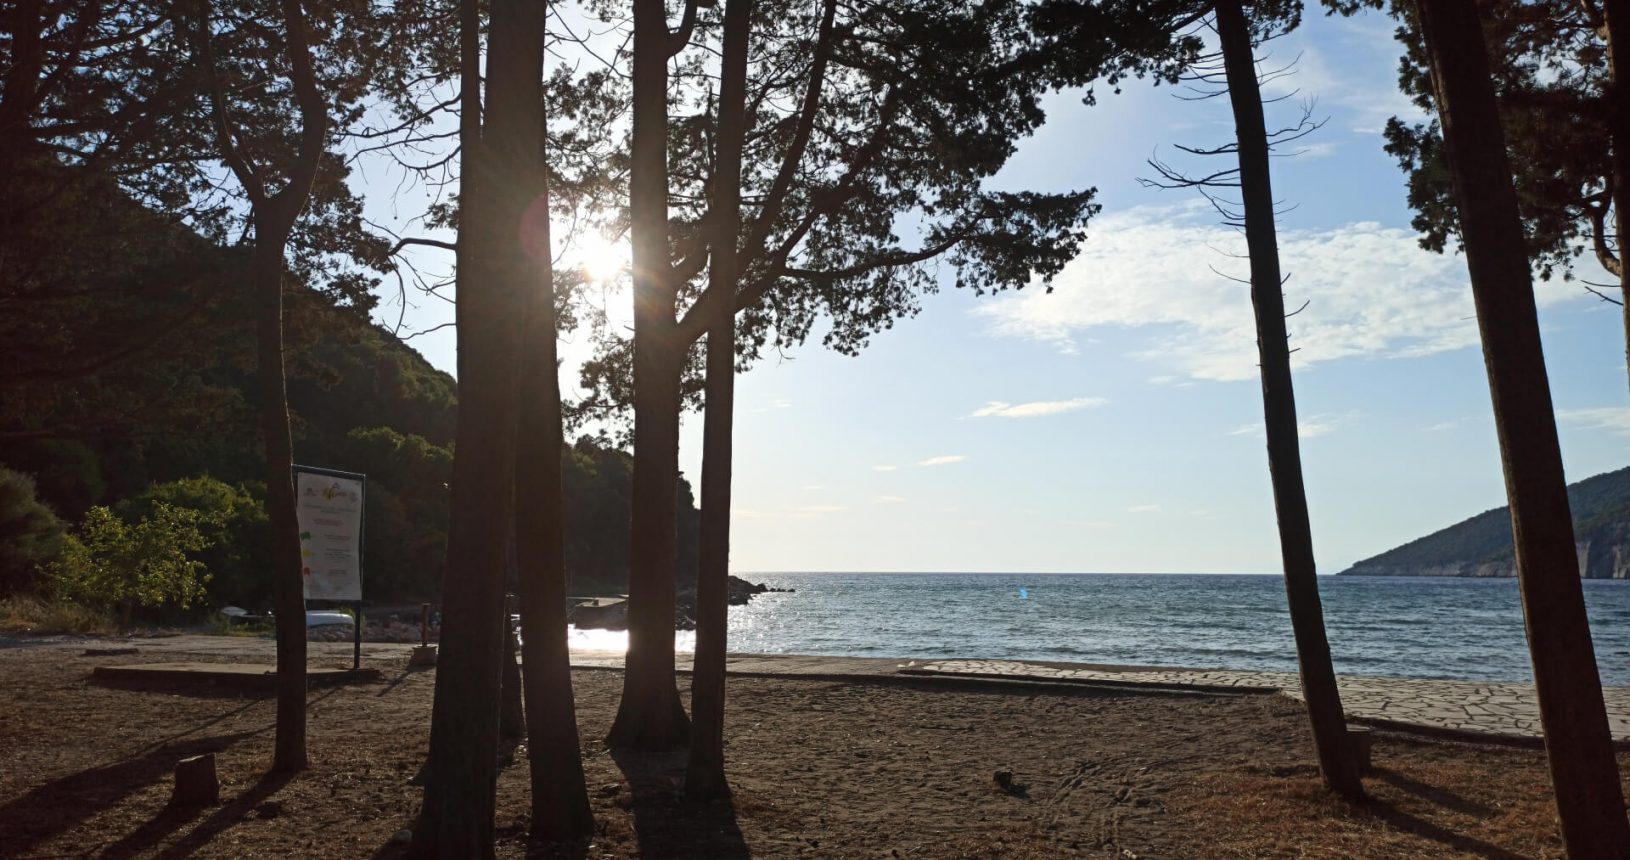 Valdanos beach surrounded by forest